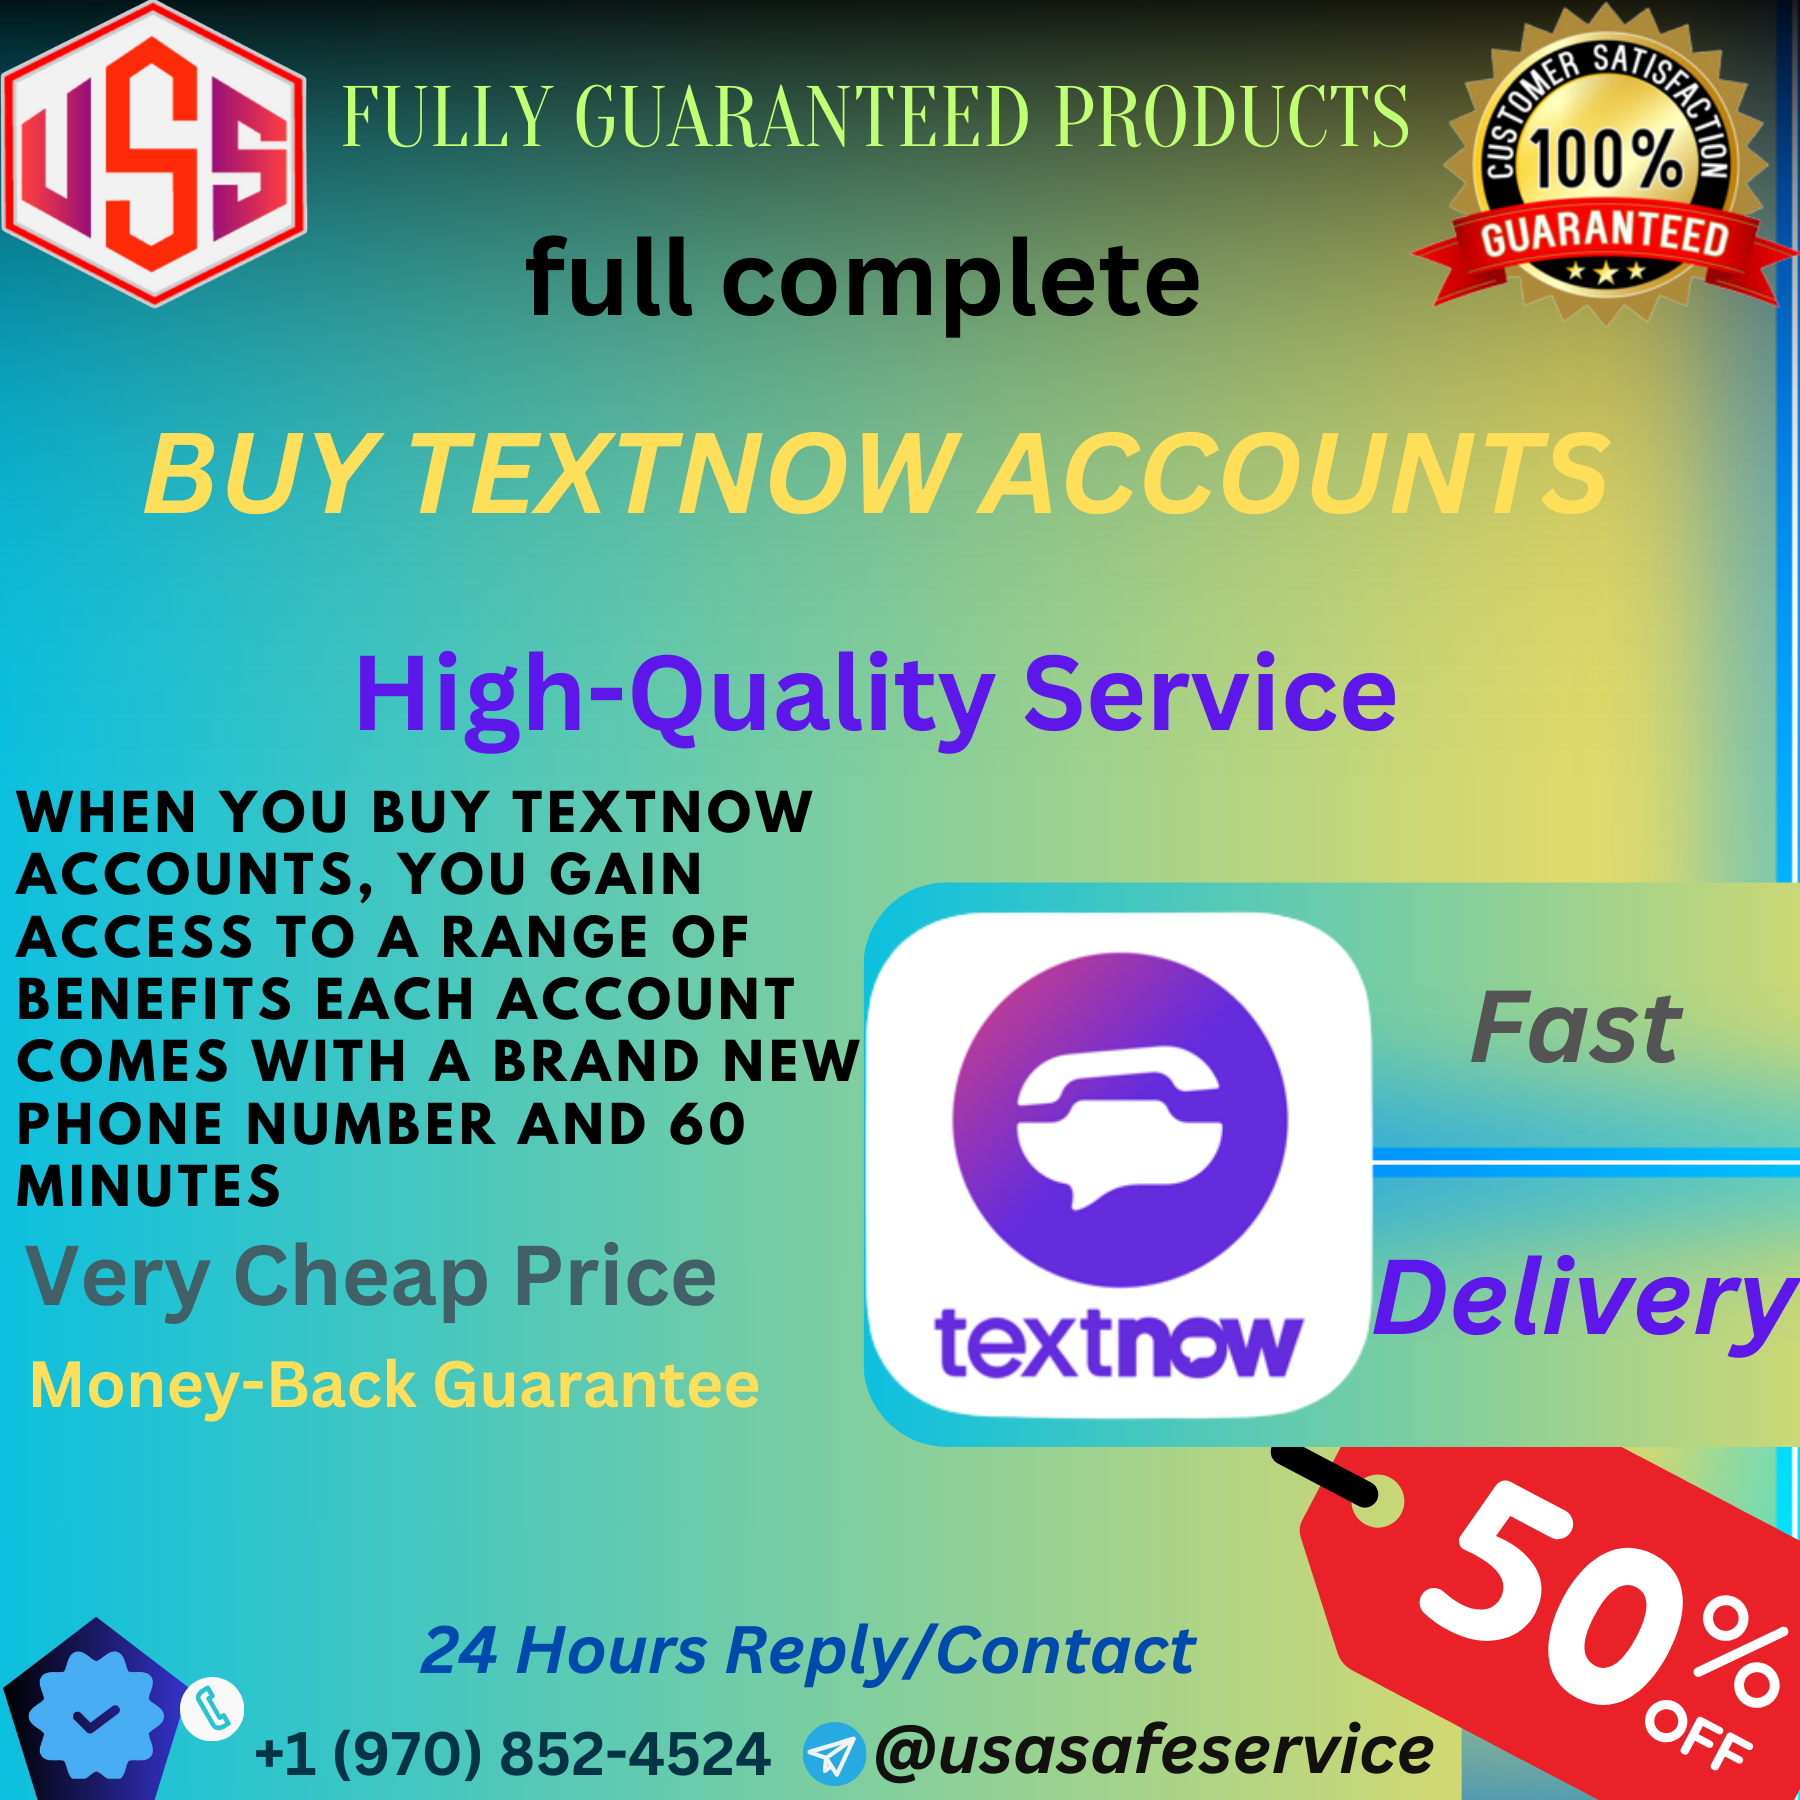 Buy TеxtNow Accounts - High-Quality and Affordable!"